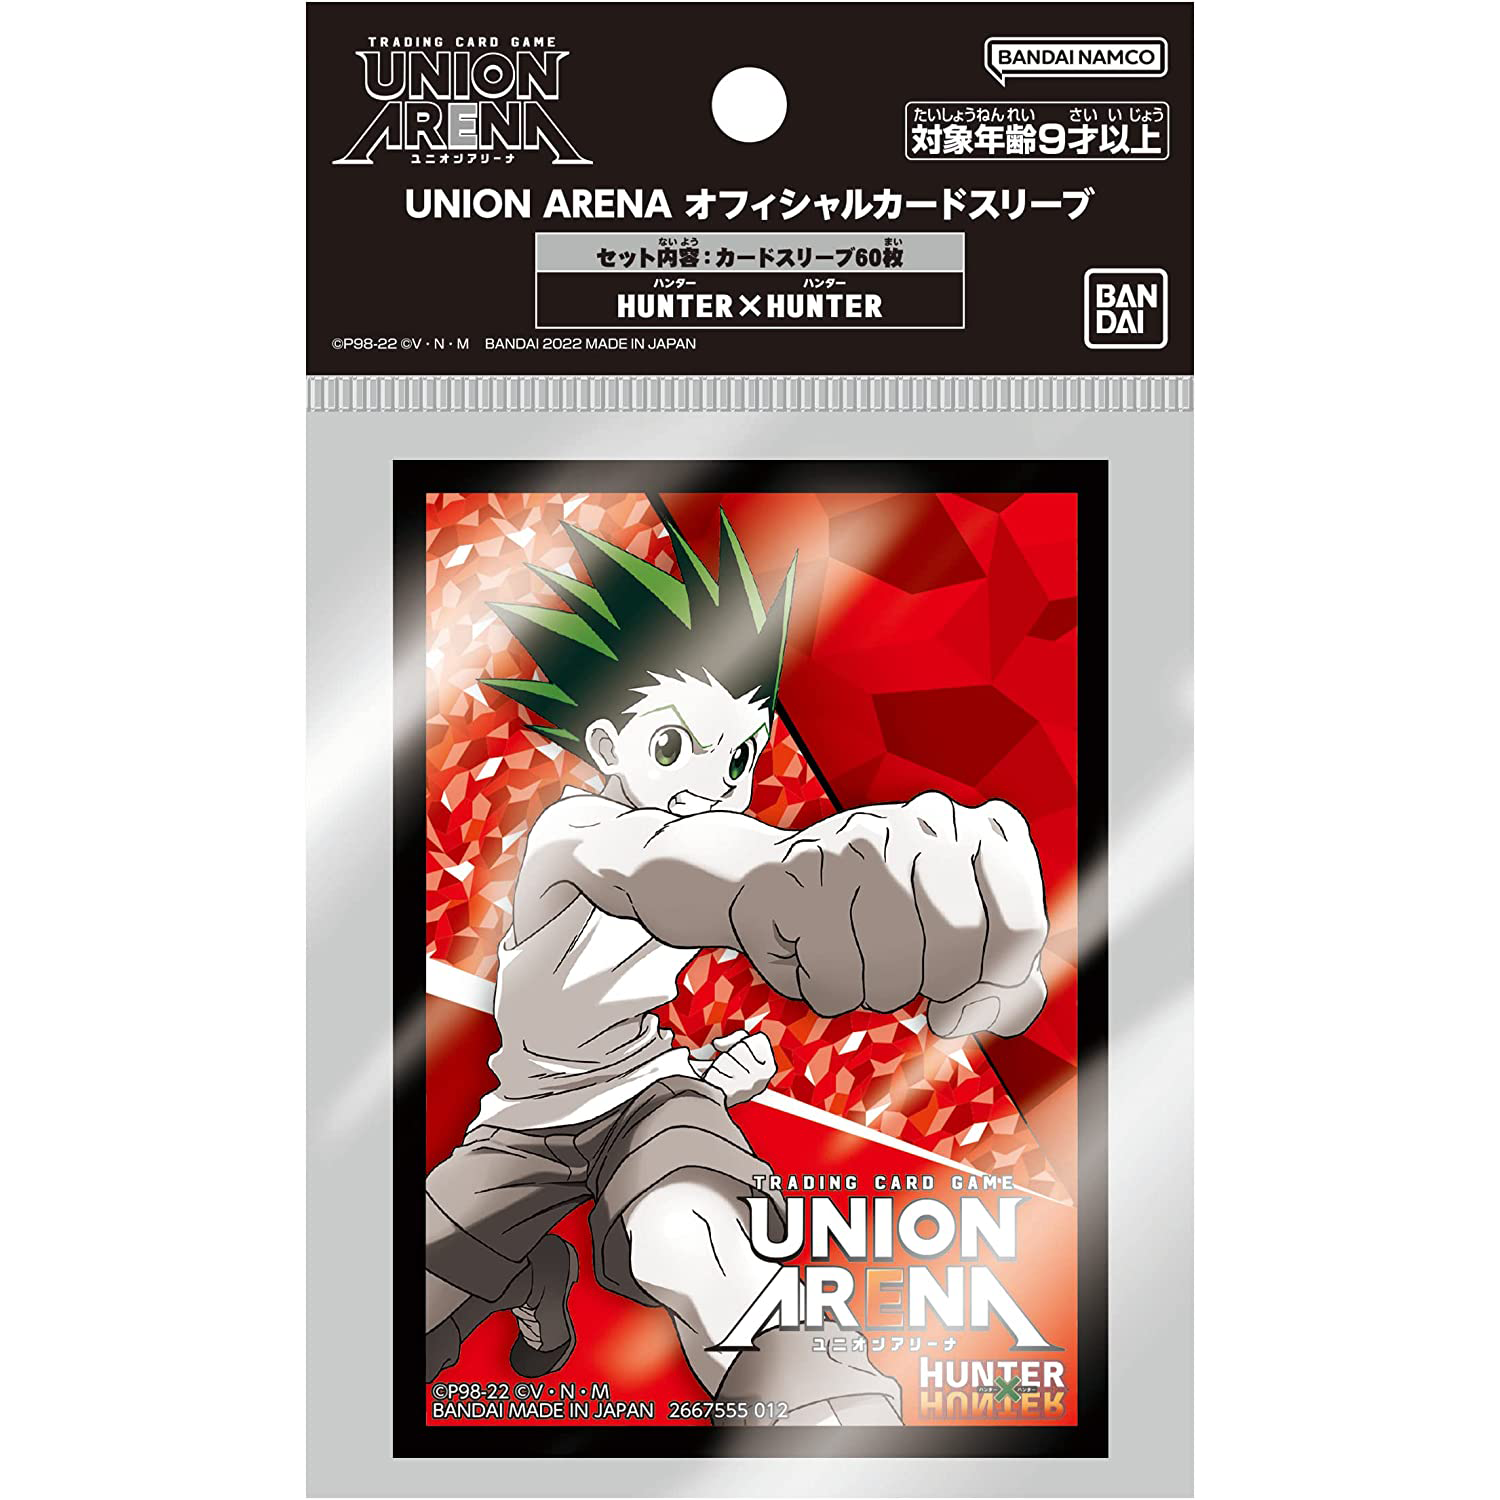 TRADING CARD GAME UNION ARENA Official Card Sleeve HUNTER×HUNTER